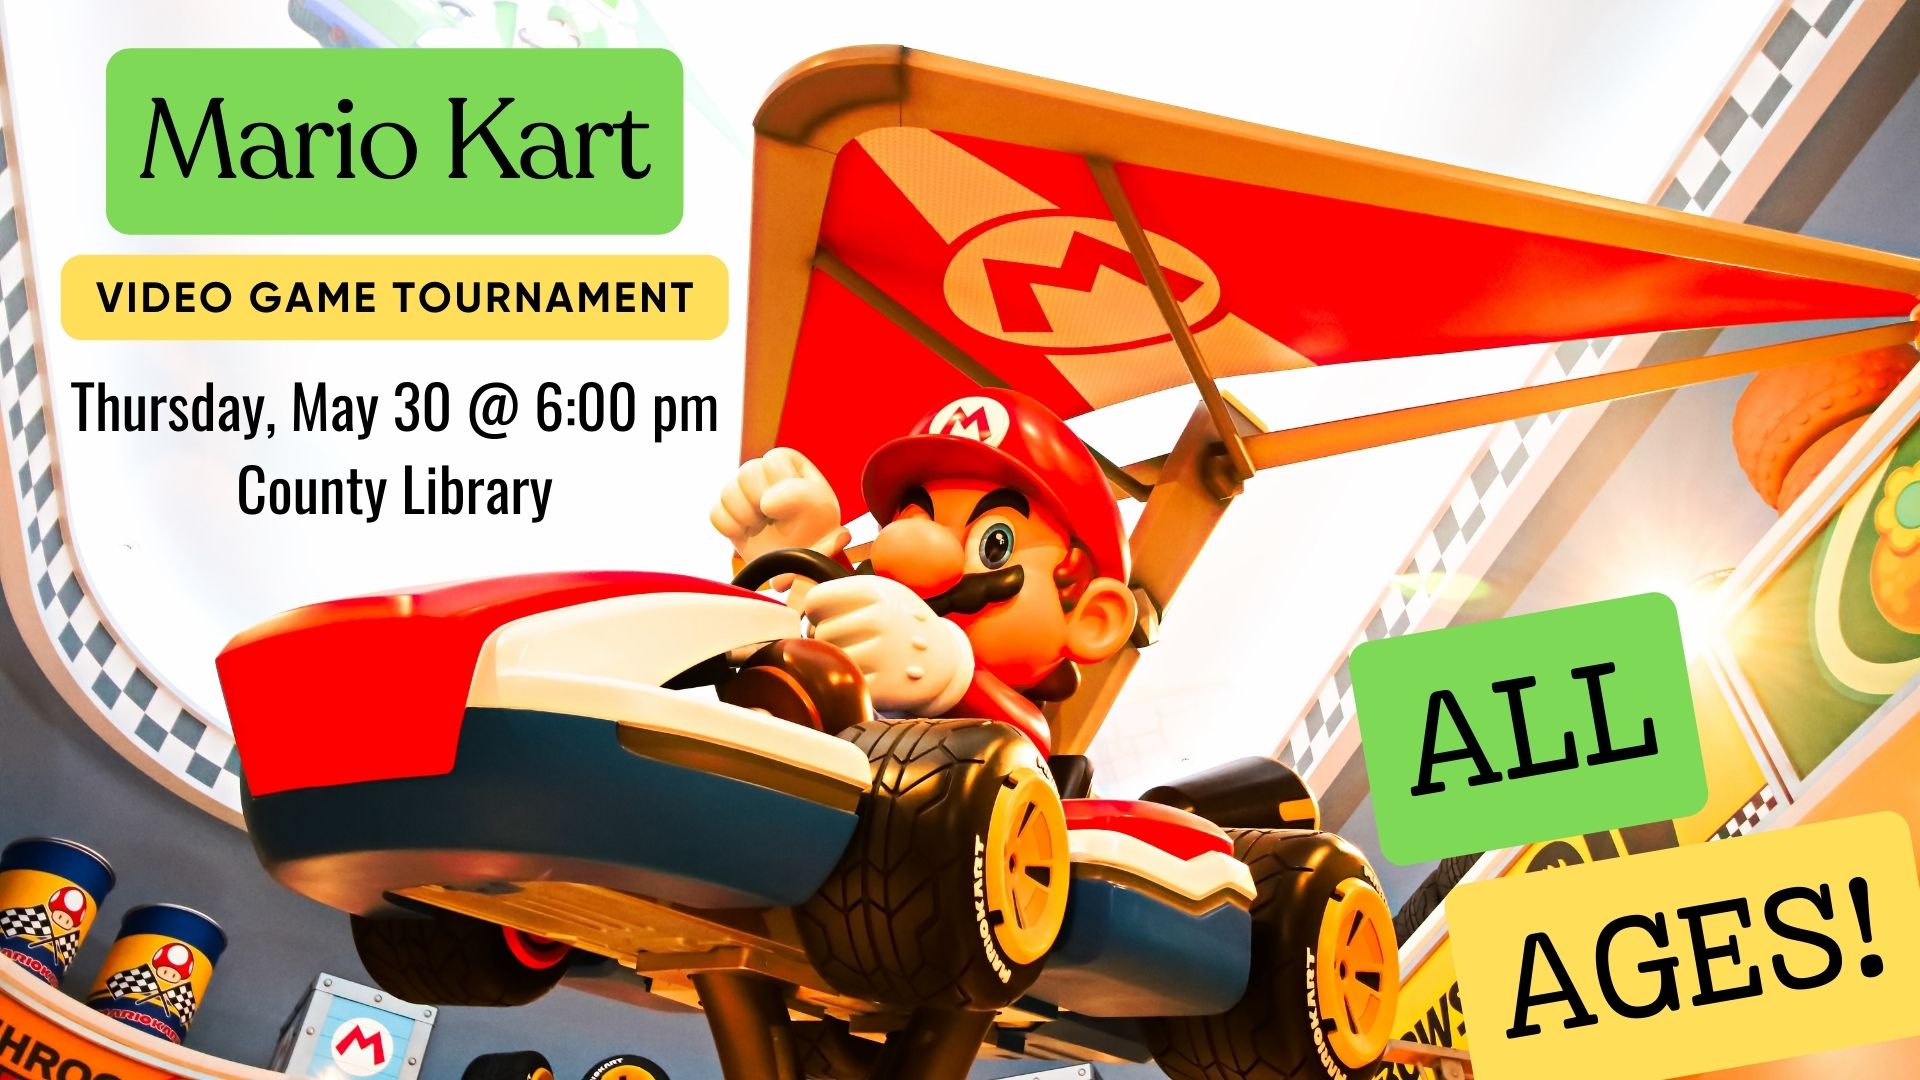 All Ages Video Game Tournament